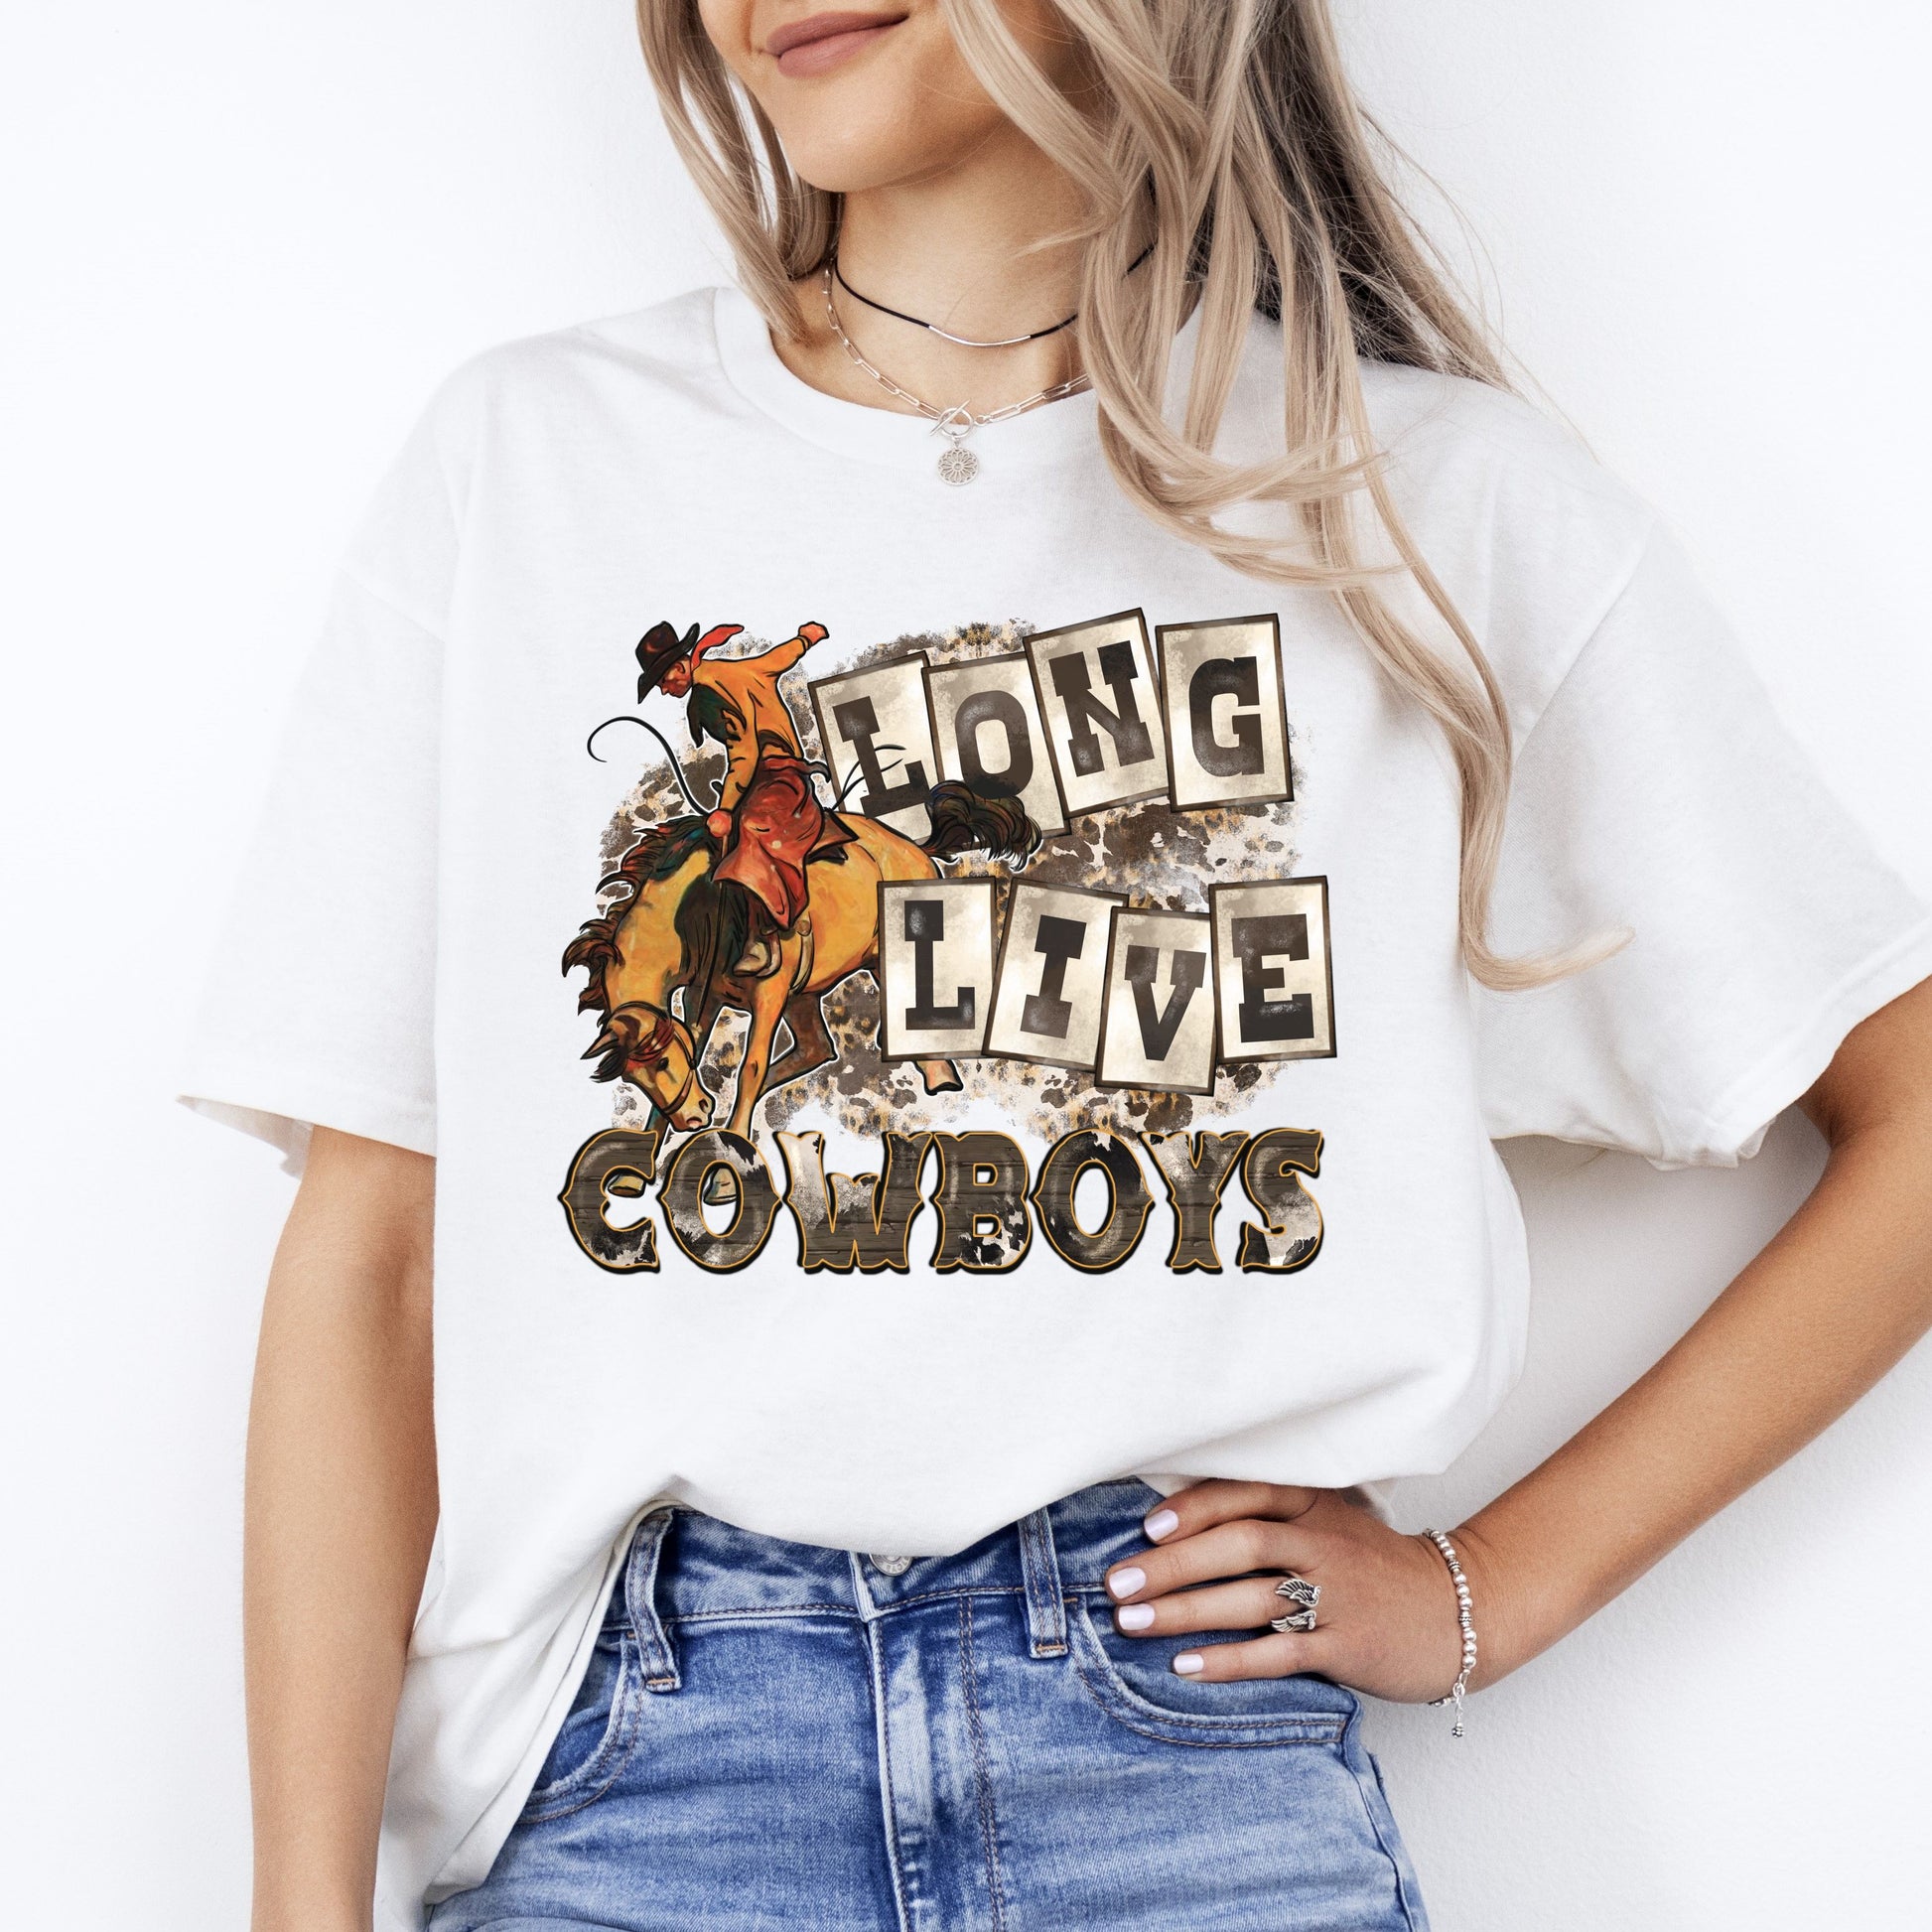 Long live cowboys T-Shirt gift Trendy Western horse cowboy Unisex Tee Sand White Sport Grey-White-Family-Gift-Planet